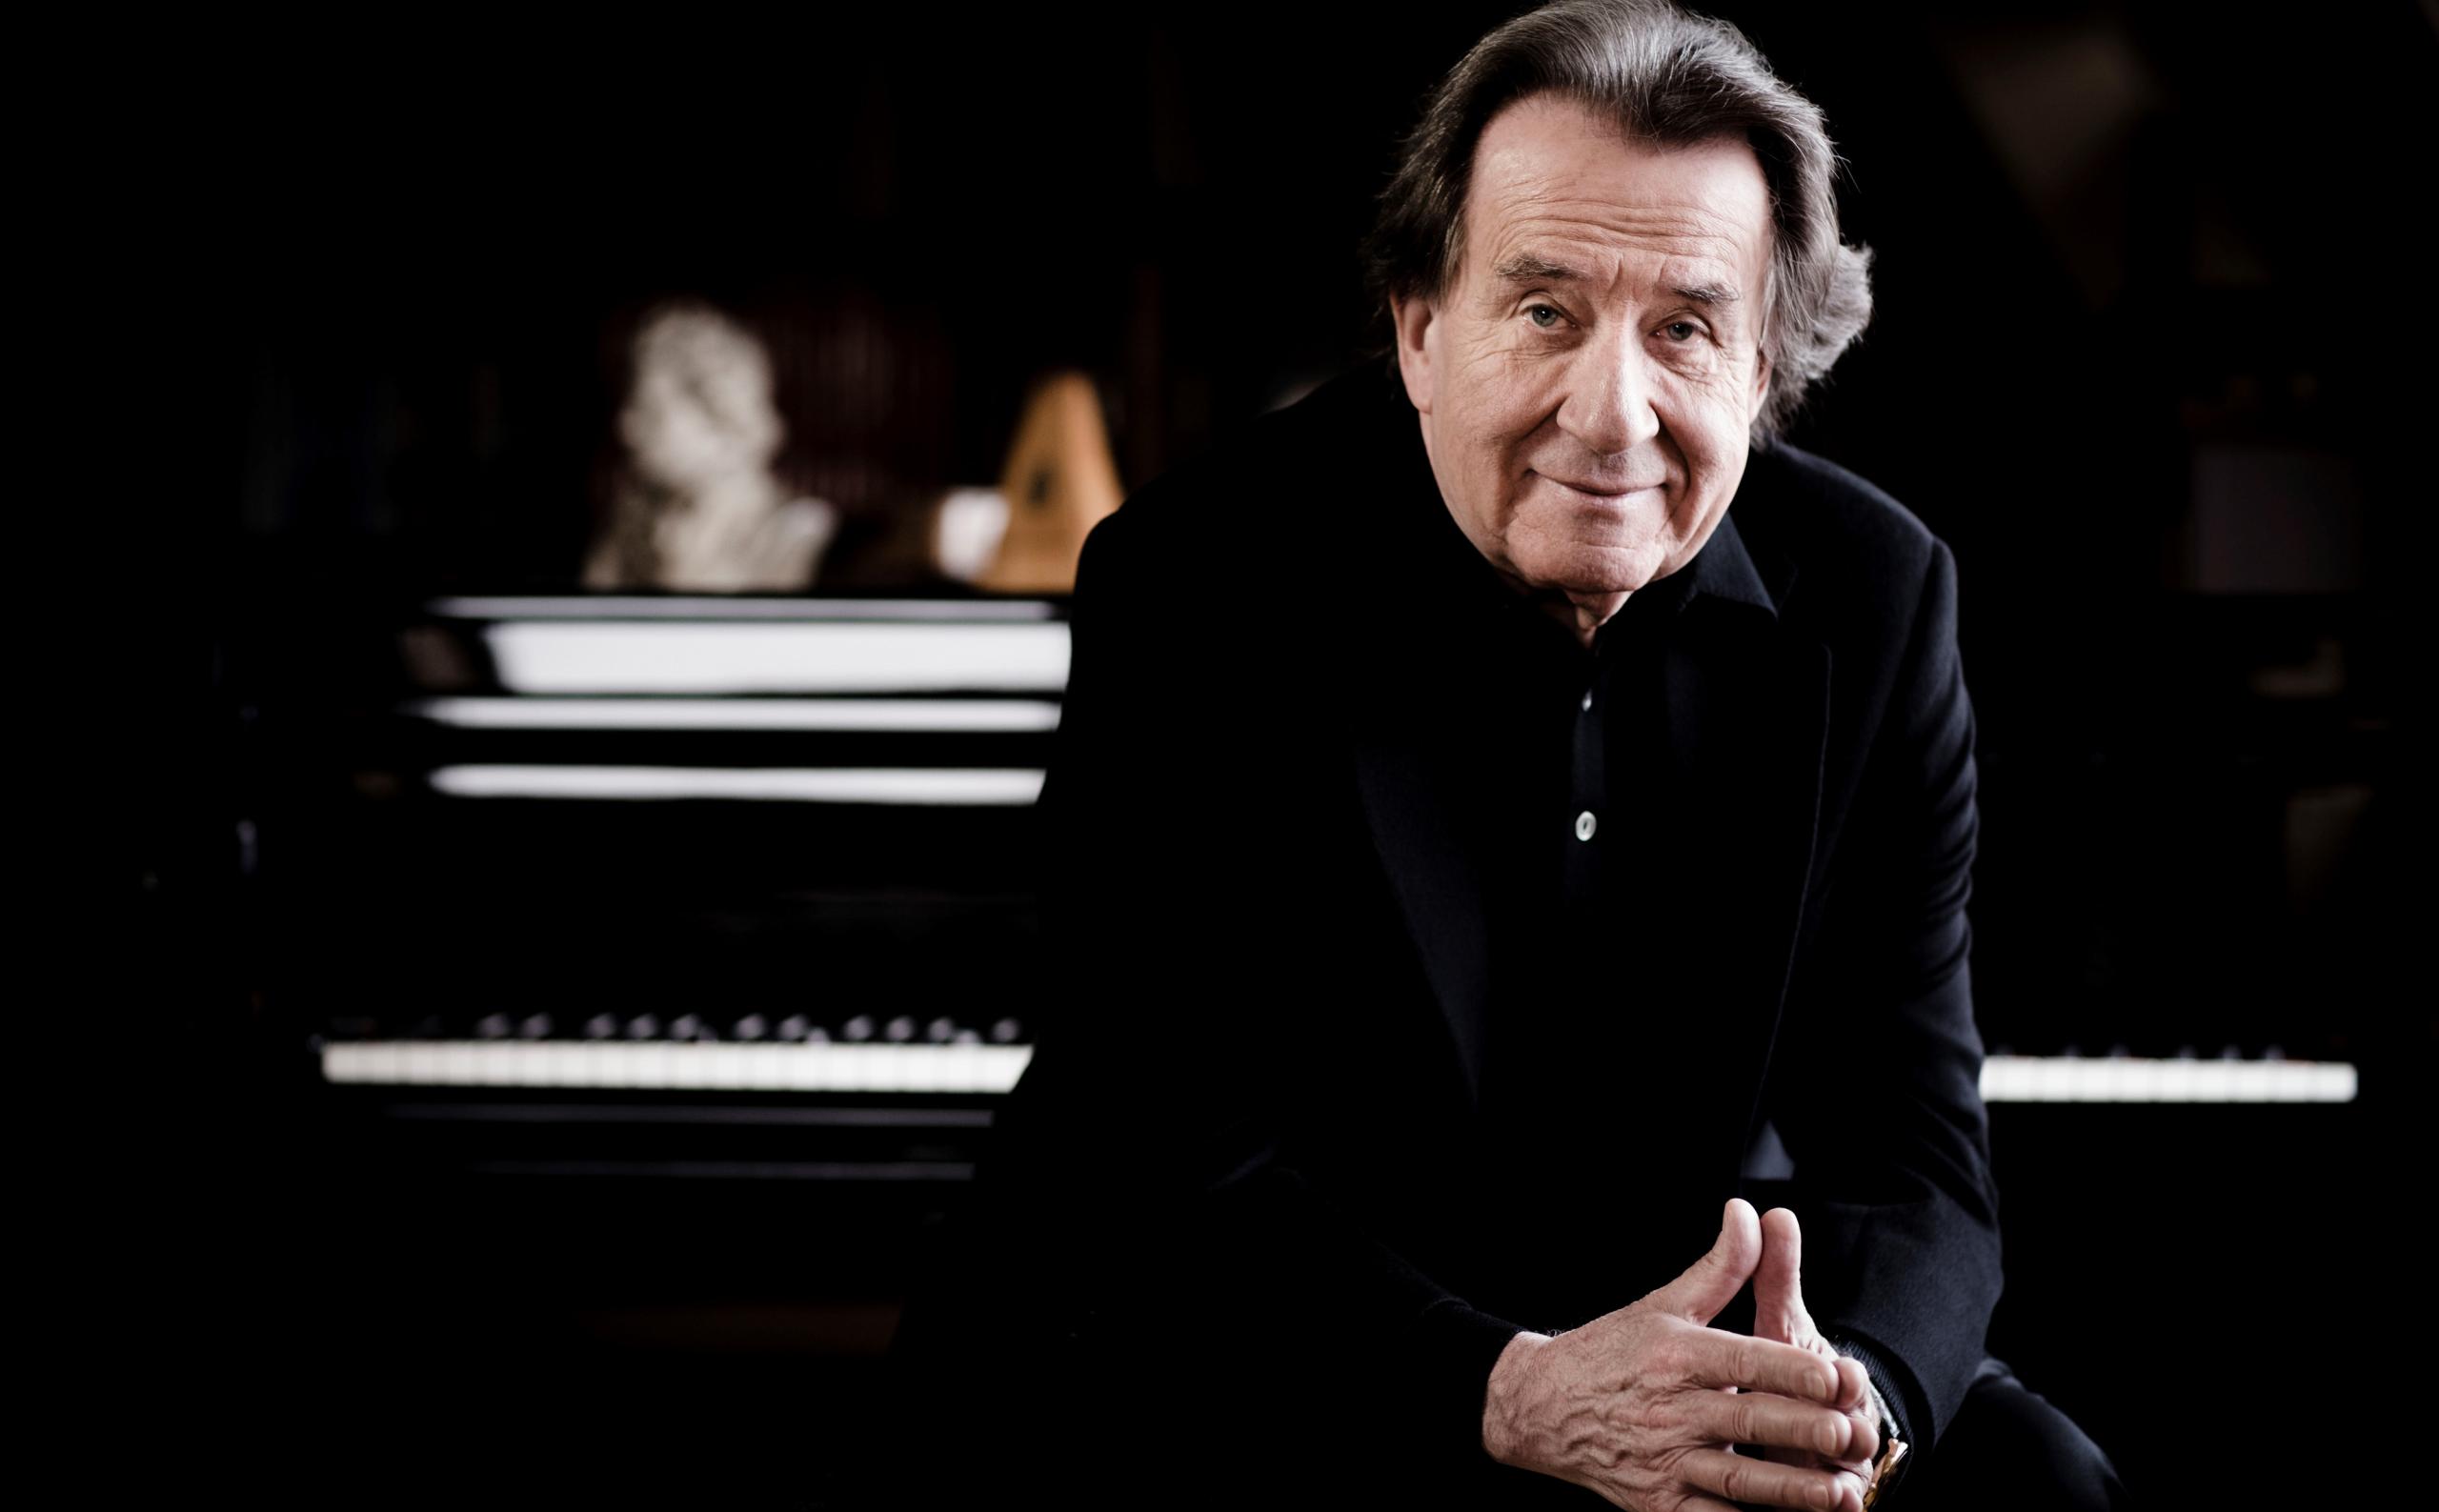 Portrait of the pianist Rudolf Buchbinder. He sits in front of a piano in a black suit and looks into the camera.